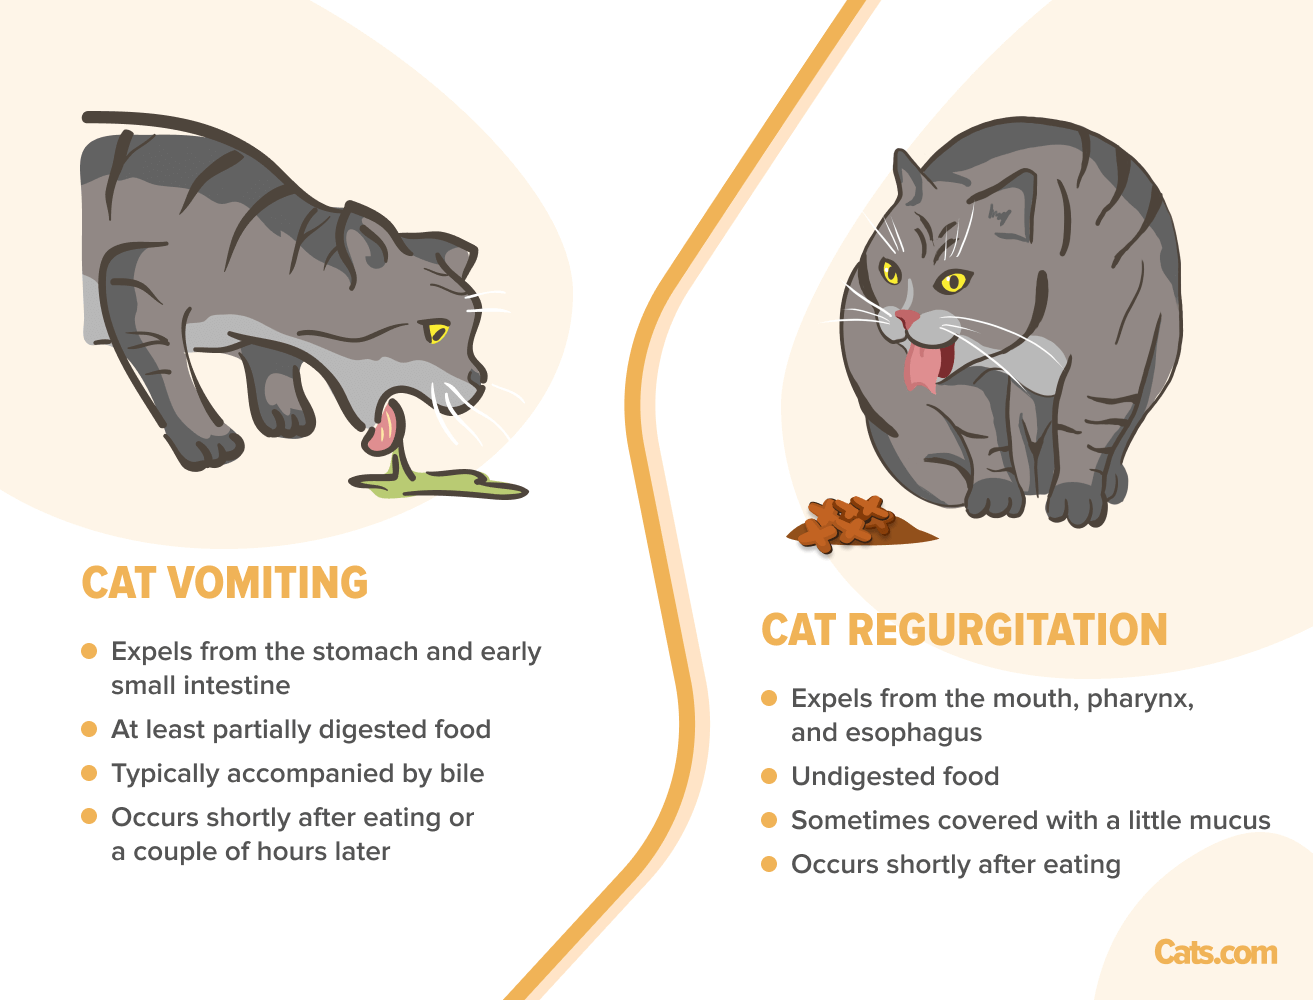 An informative illustration depicting the difference between vomit and regurgitation in cats. Vomit, shown on the left, involves partially digested food and often has a fluid consistency. Regurgitation, shown on the right, is undigested food expelled from the esophagus without the forceful abdominal contractions associated with vomiting.